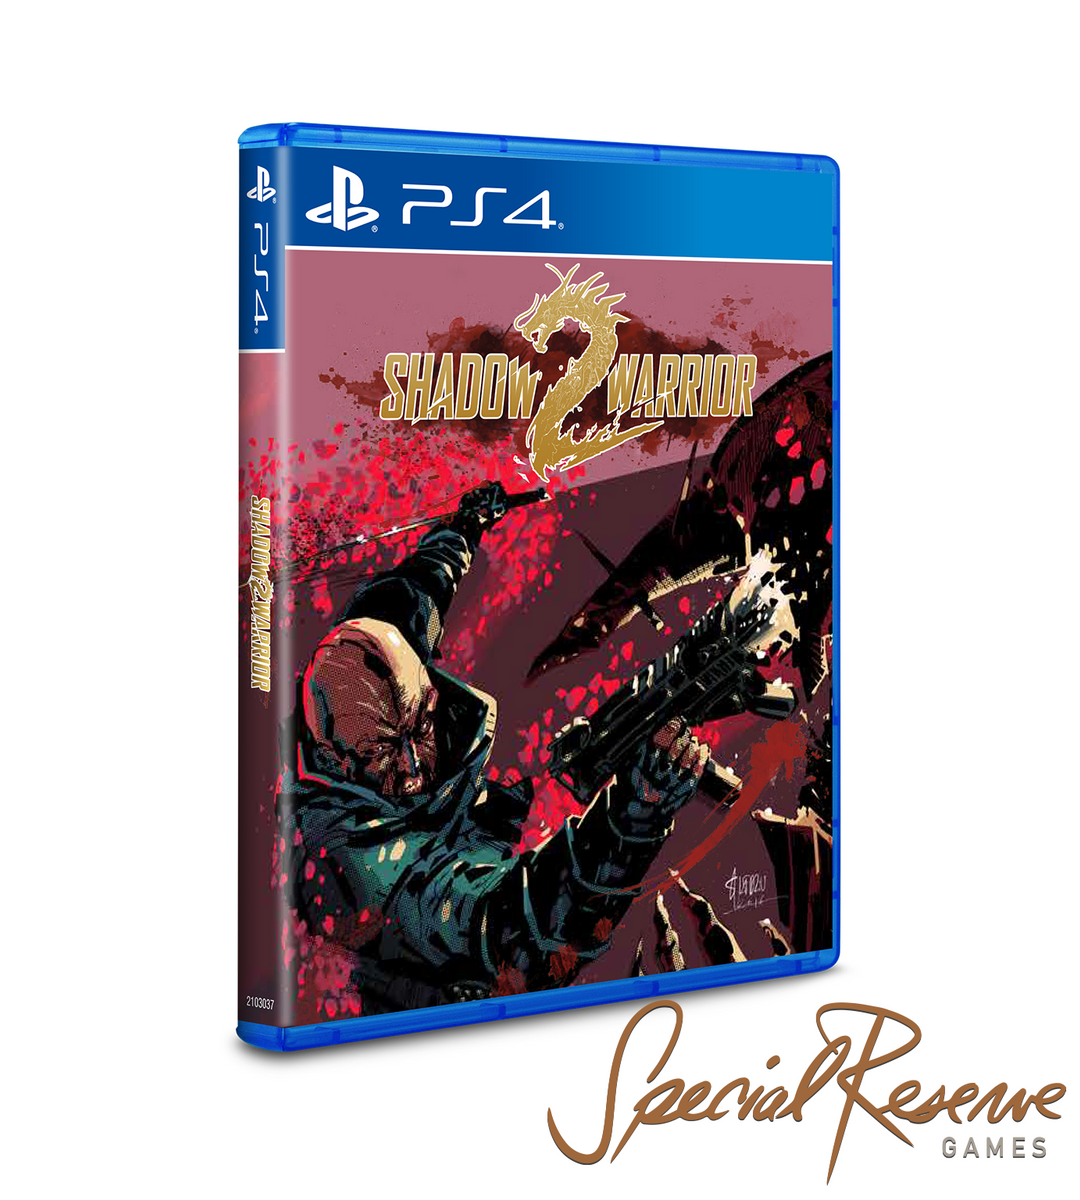 Shadow Warrior 2 Special Reserve Collector's Edition announced